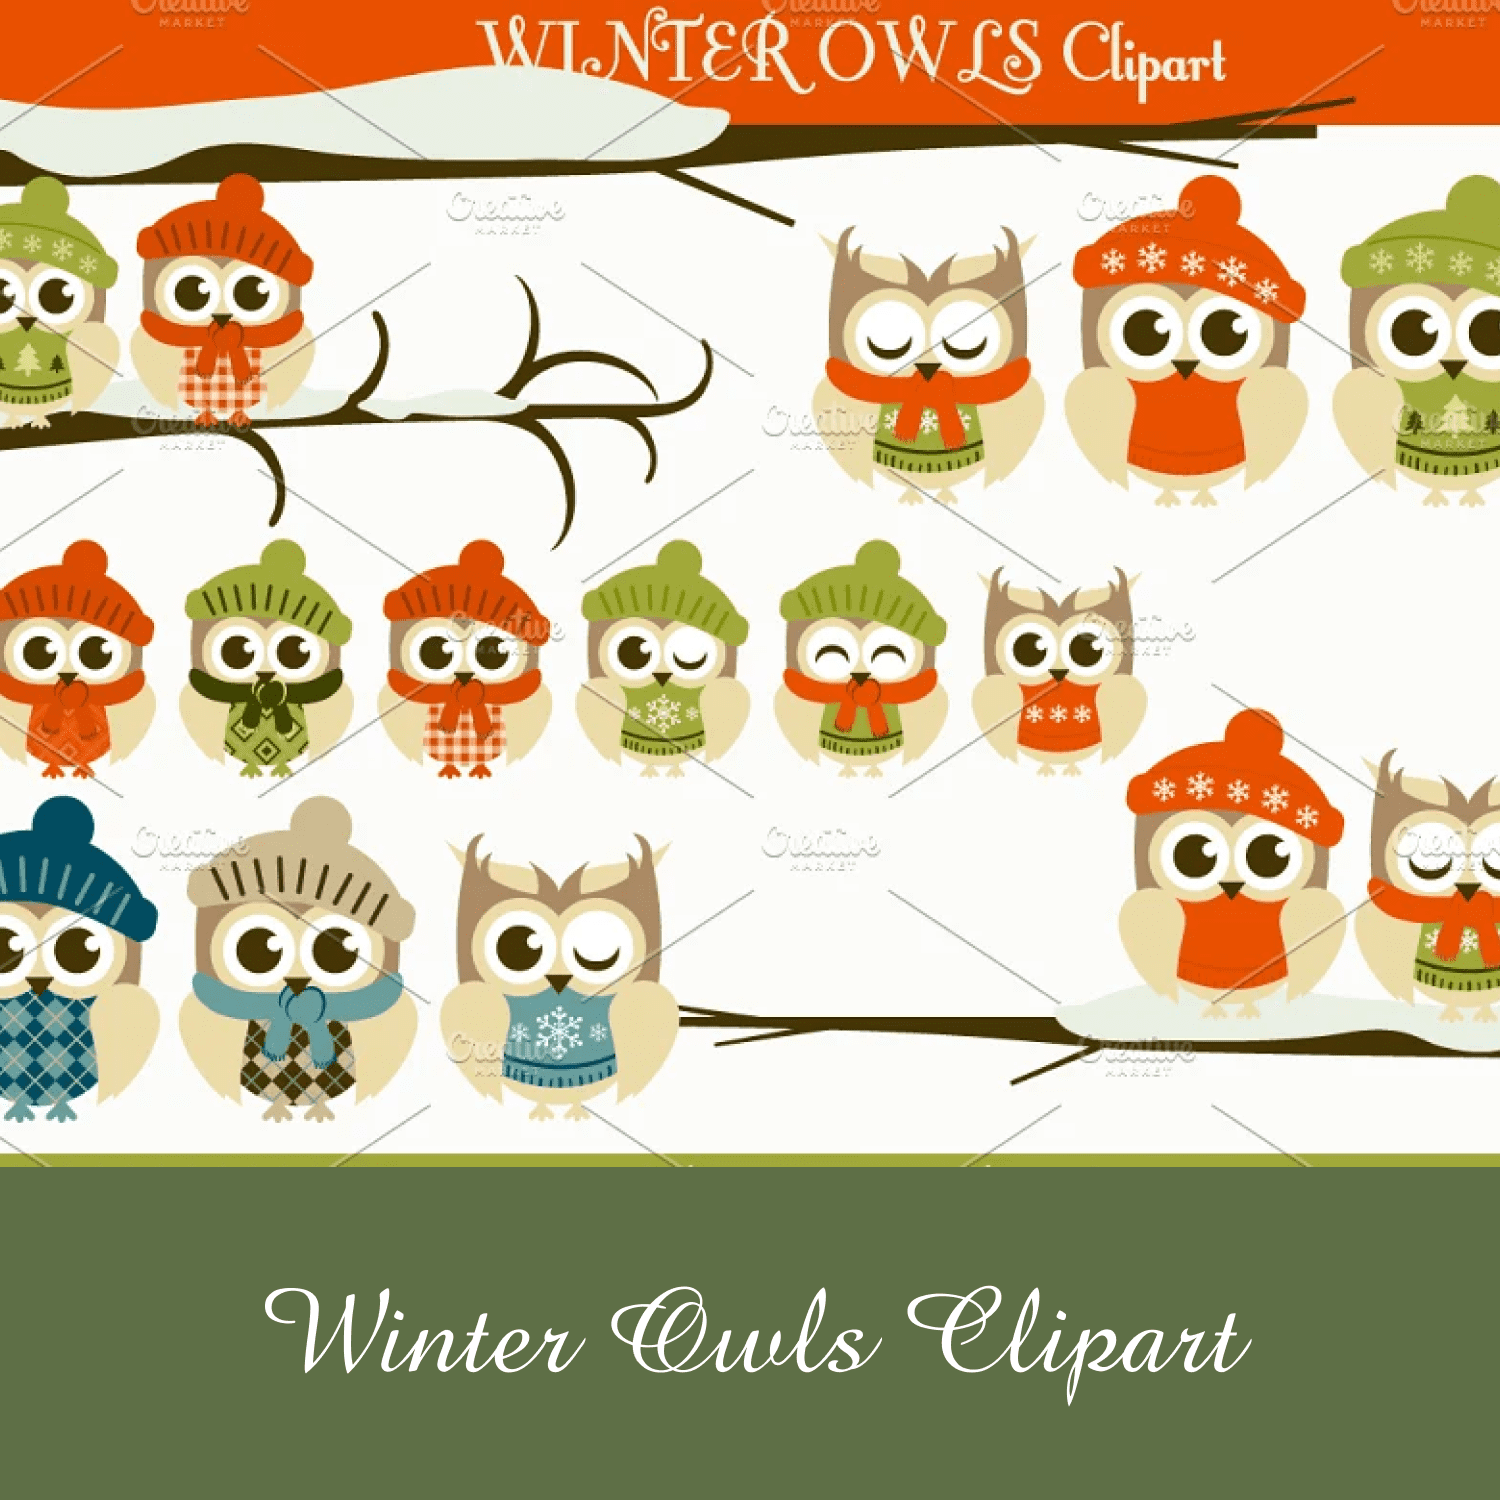 Winter Owls Clipart cover.